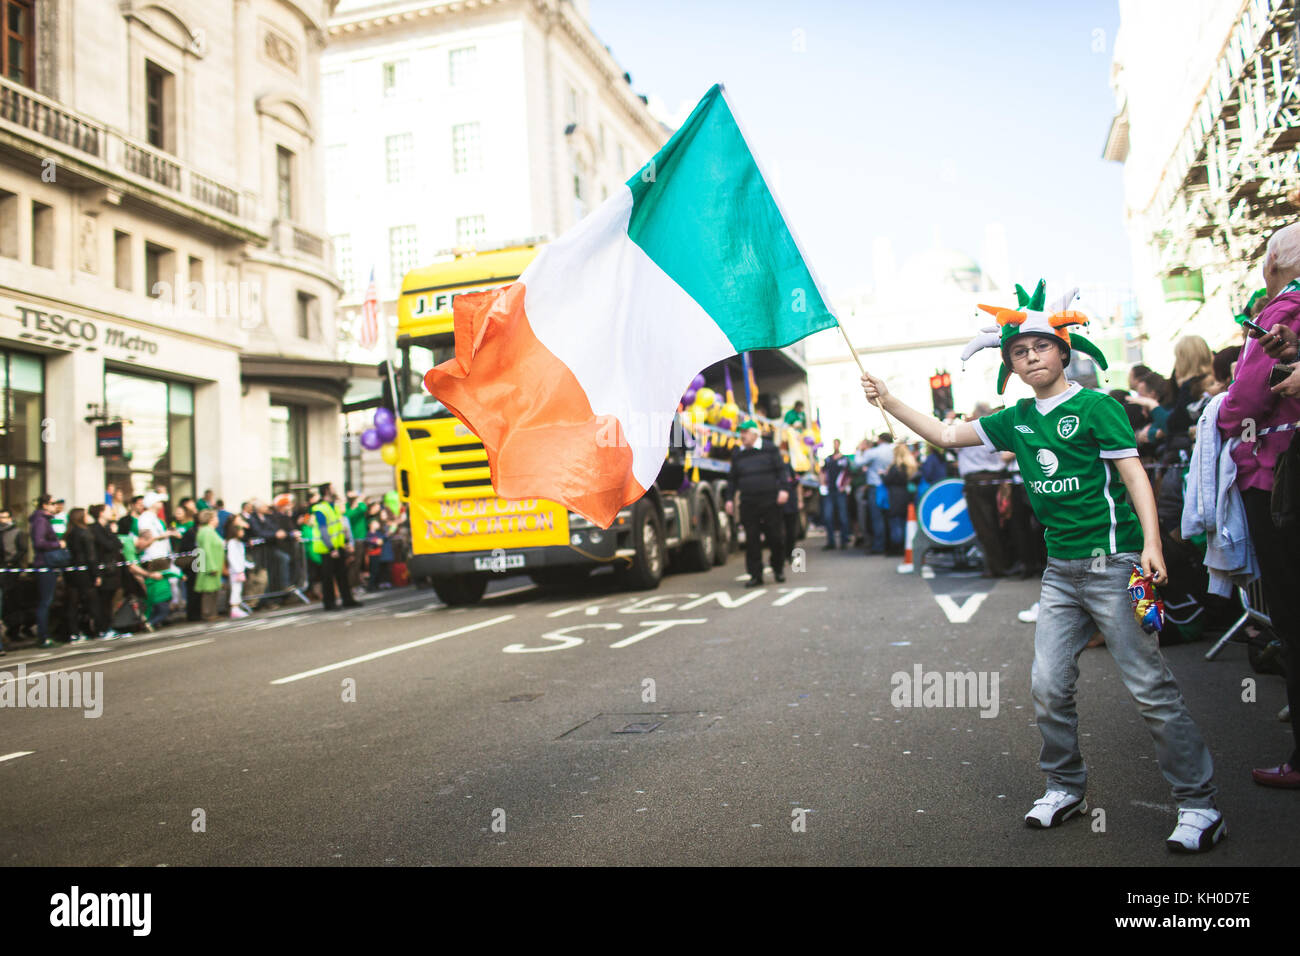 A young participant waves the Irish flag and wears and Irish national jersey and hat at the St. Patrick’s Day celebration in London. UK 16/03 2014. Stock Photo